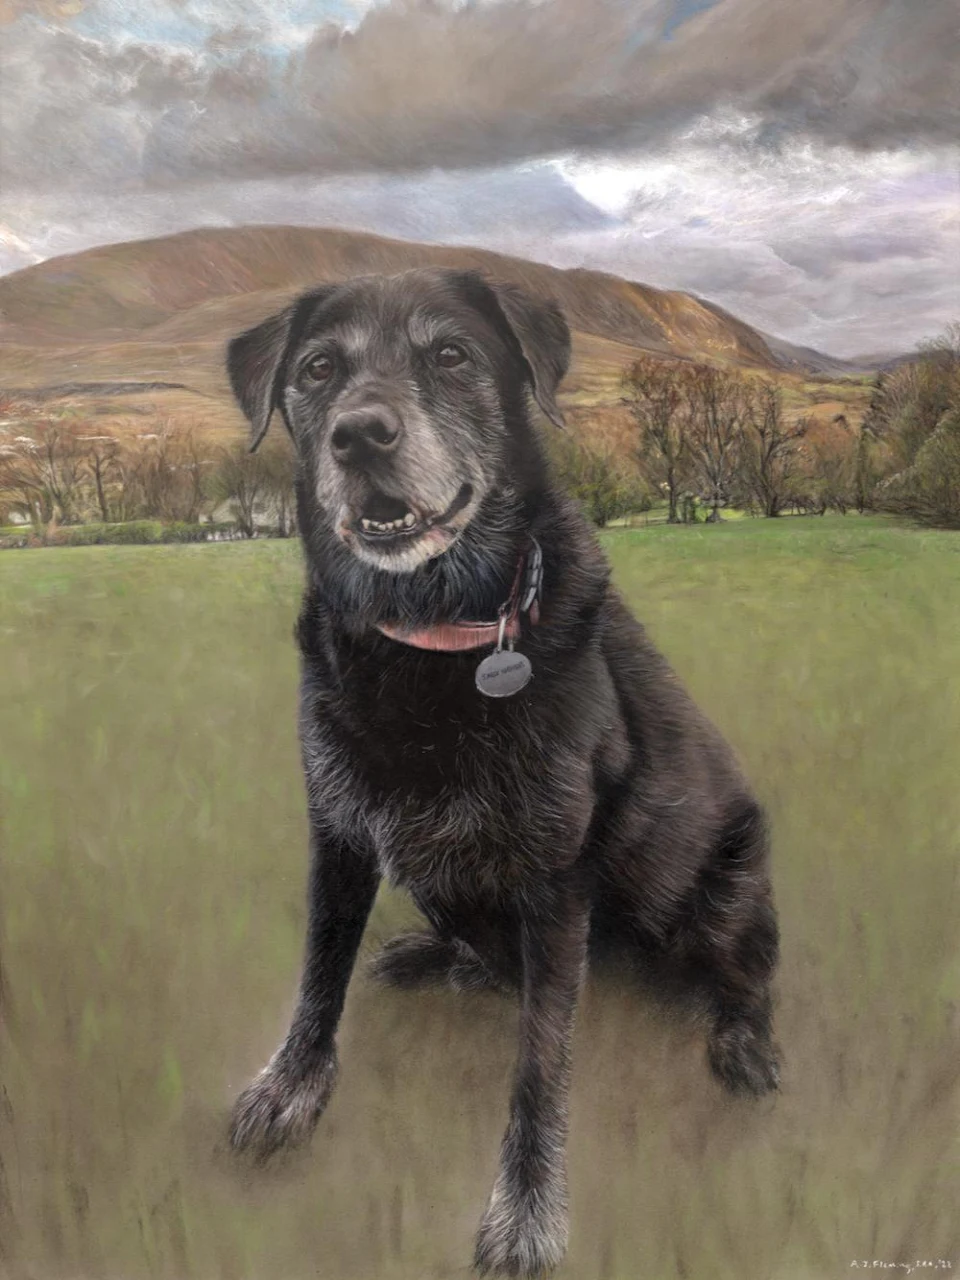 Here's a pastel drawing of Sally, the labrador. Hope you like it!